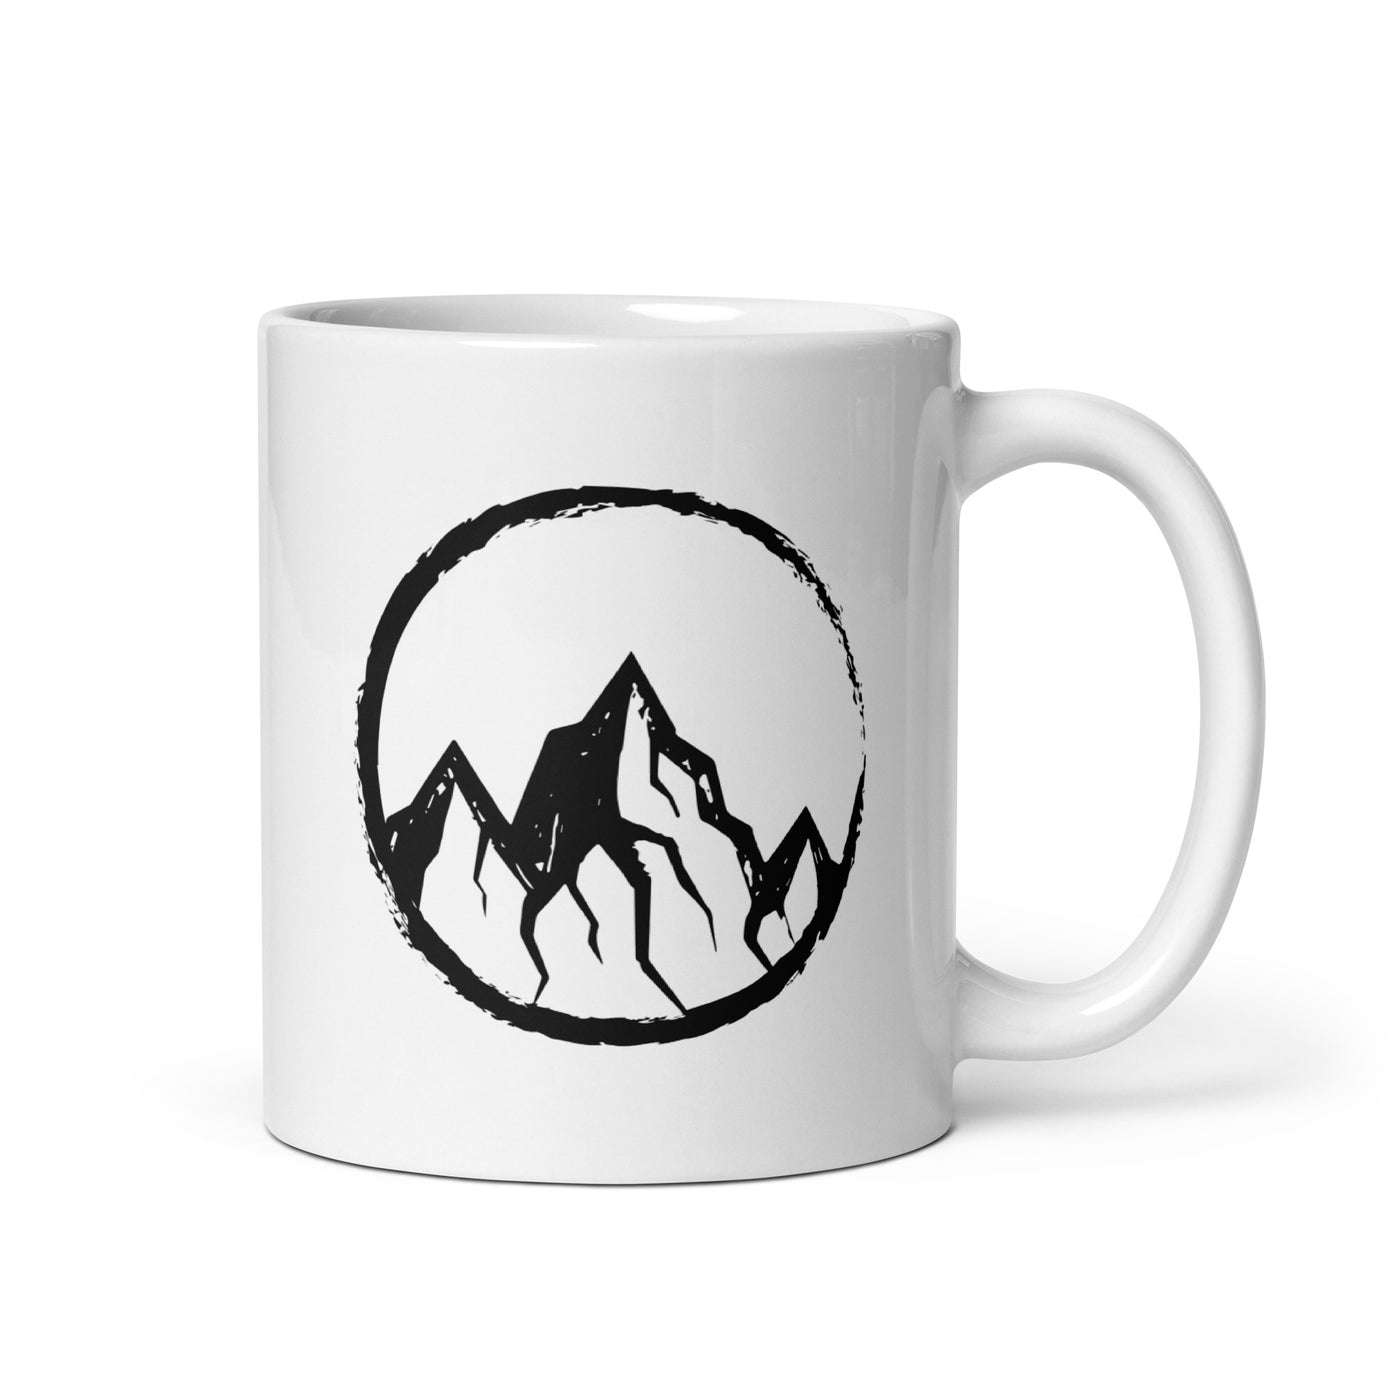 Cricle And Mountain - Tasse berge